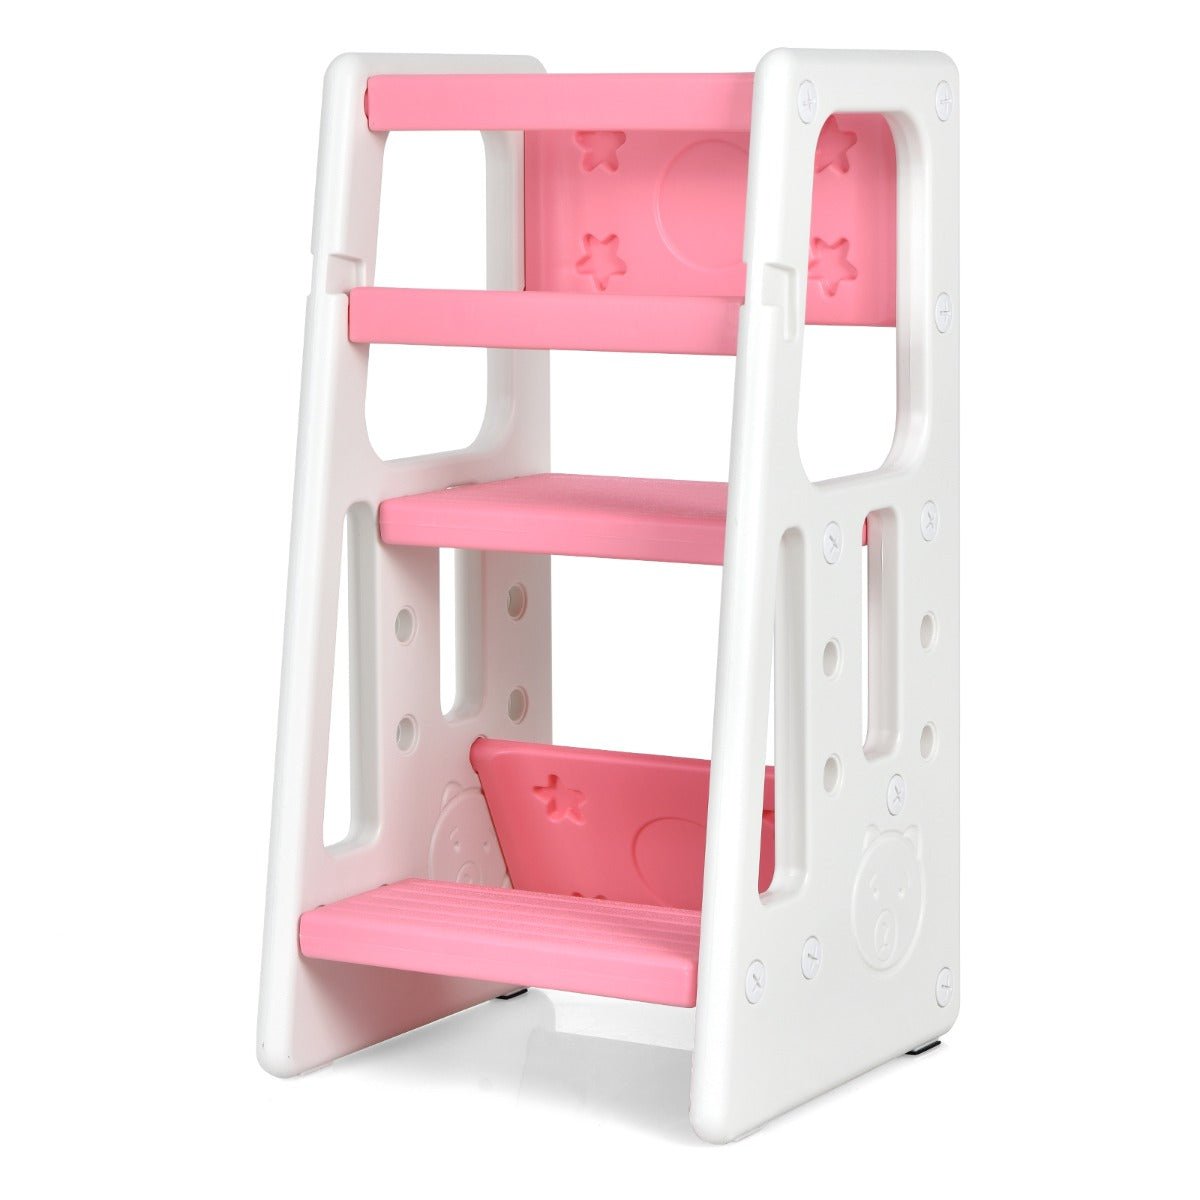 Baby Step Learning Stool - Double Safety Rails - Enhance Independence